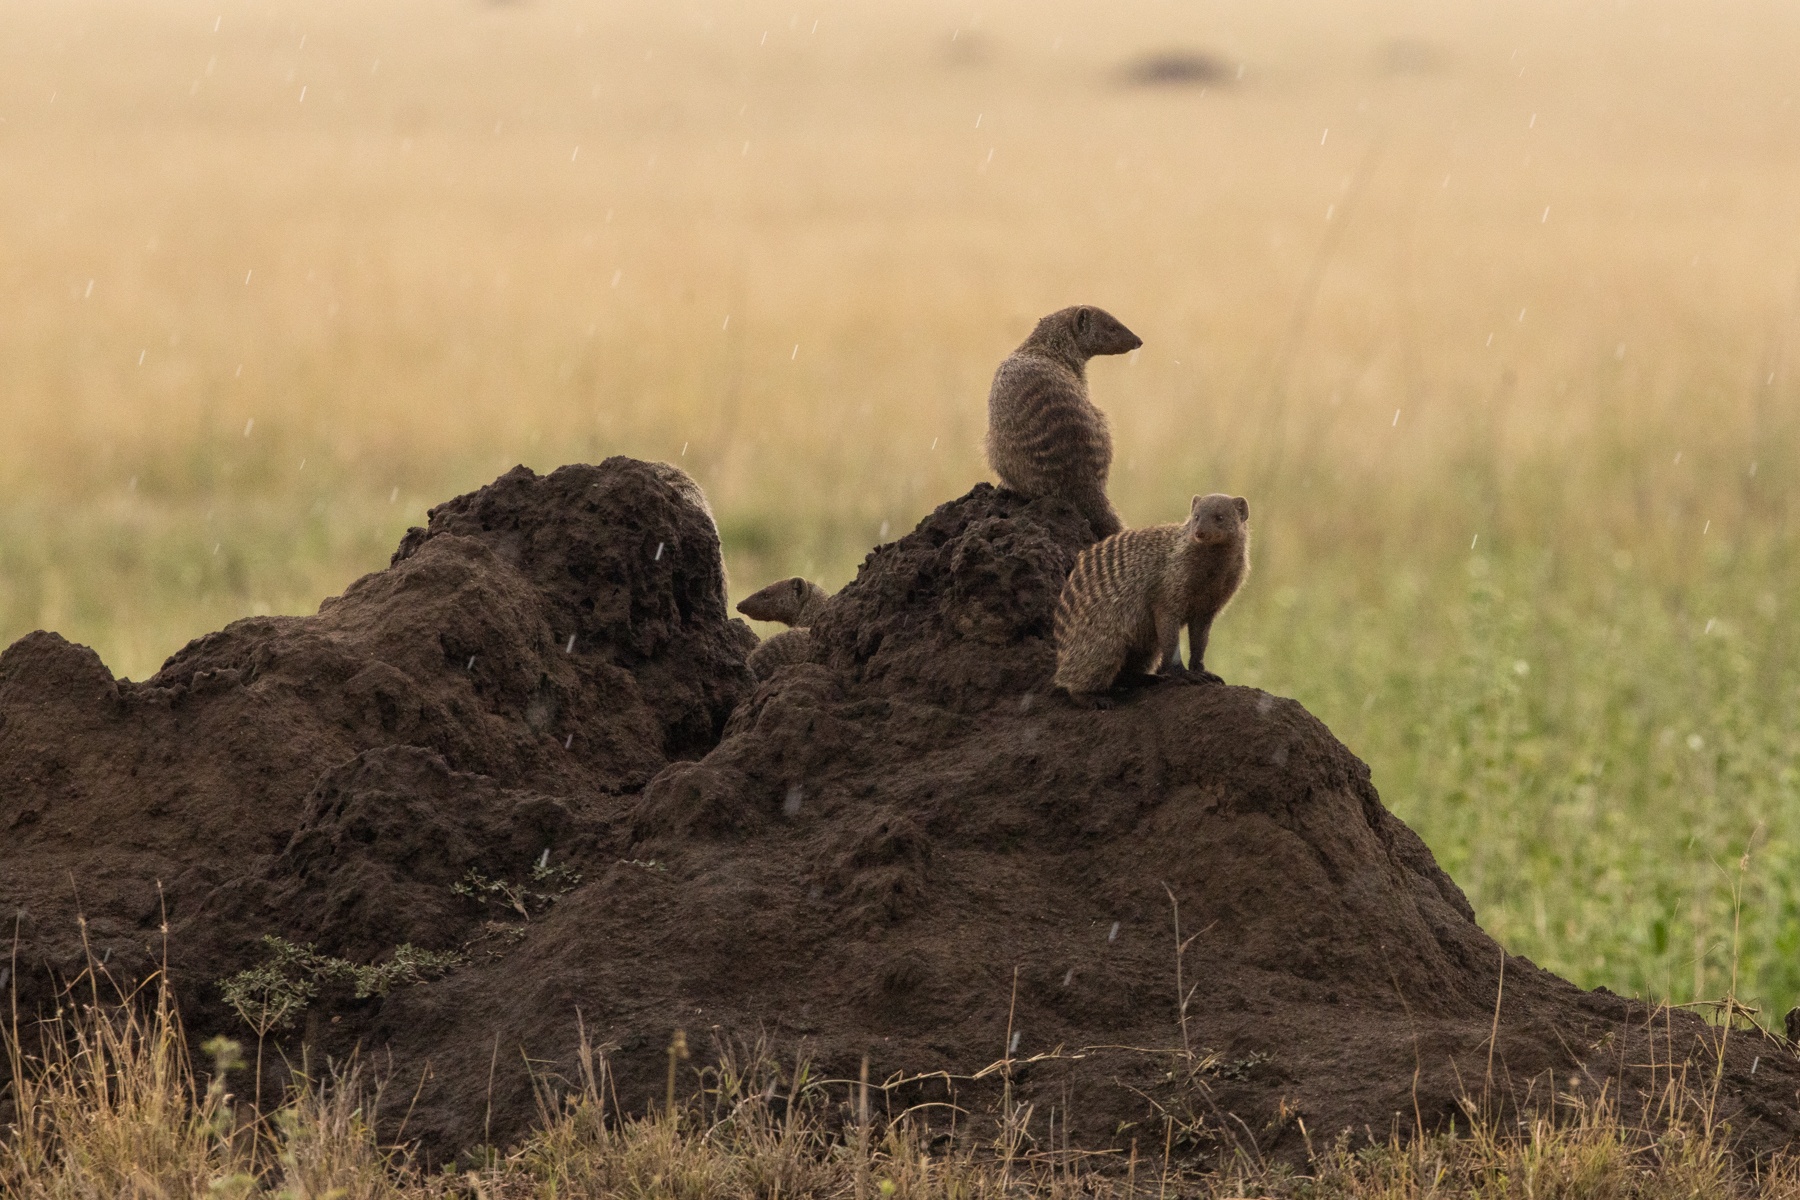 Banded Mongoose family in the rains of the Serengeti